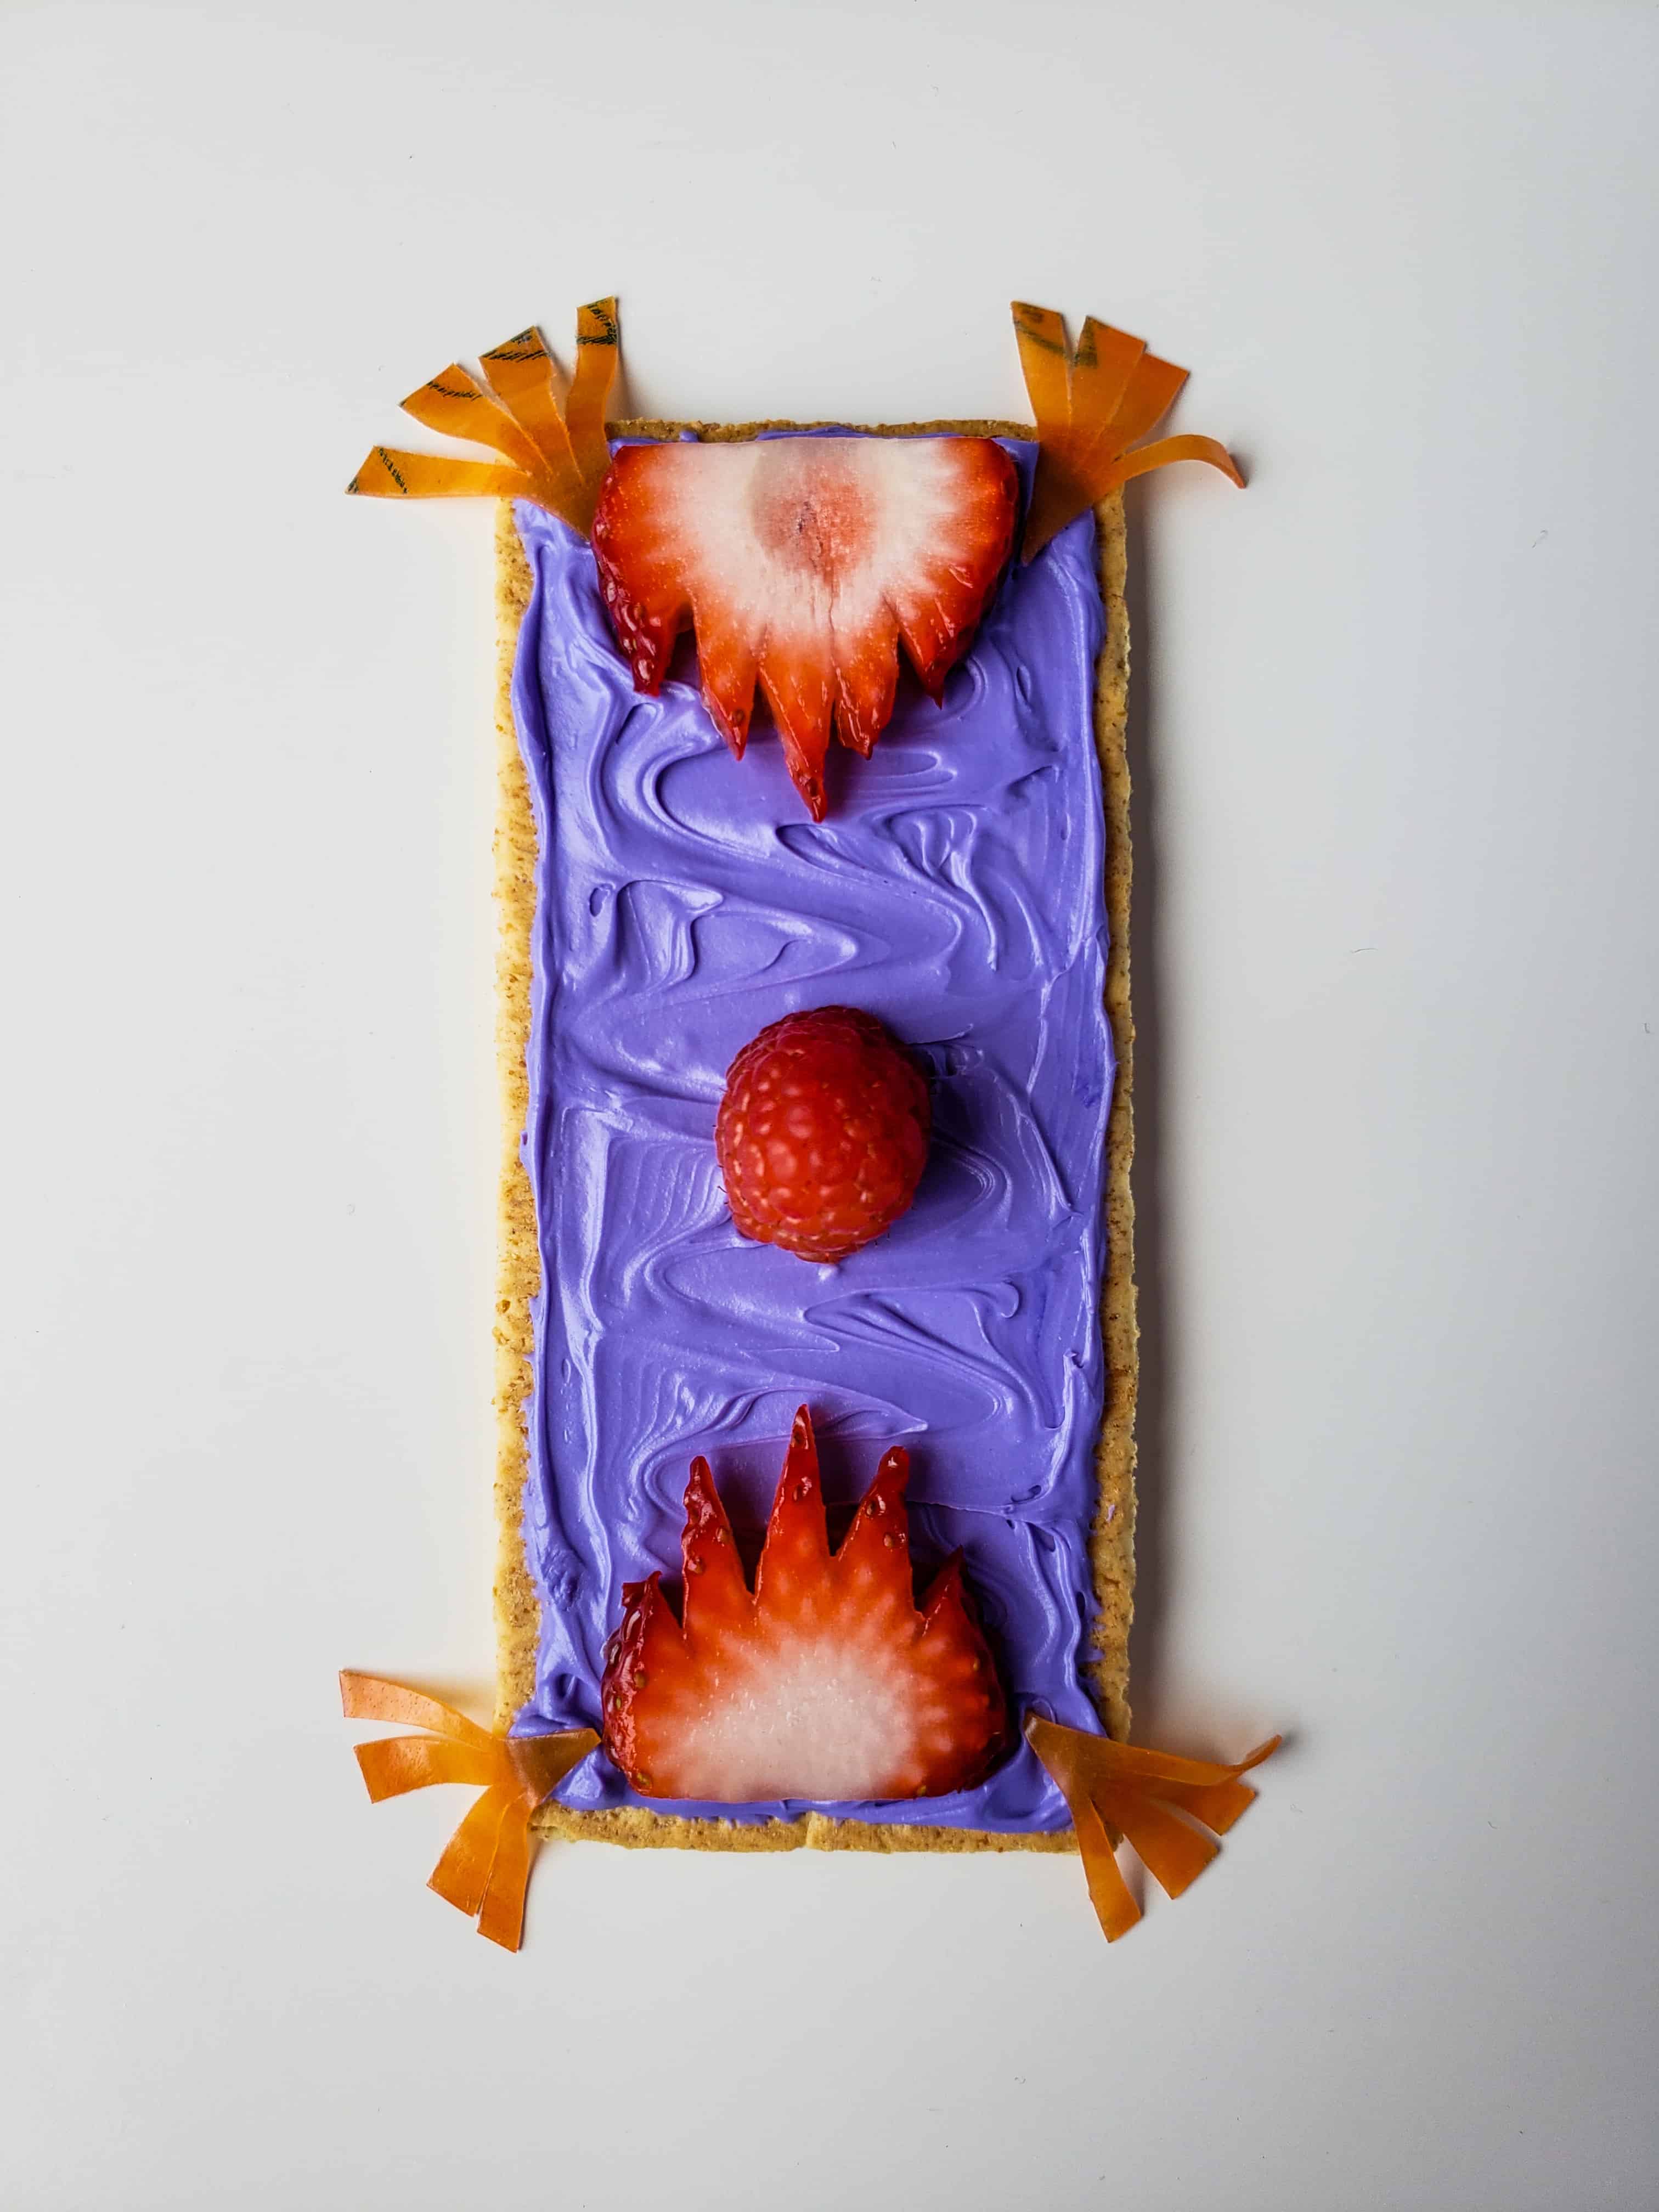 Who doesn't love the Aladdin Movie? Check out this super easy magic carpet Disney inspired snack recipe that the kids will love!